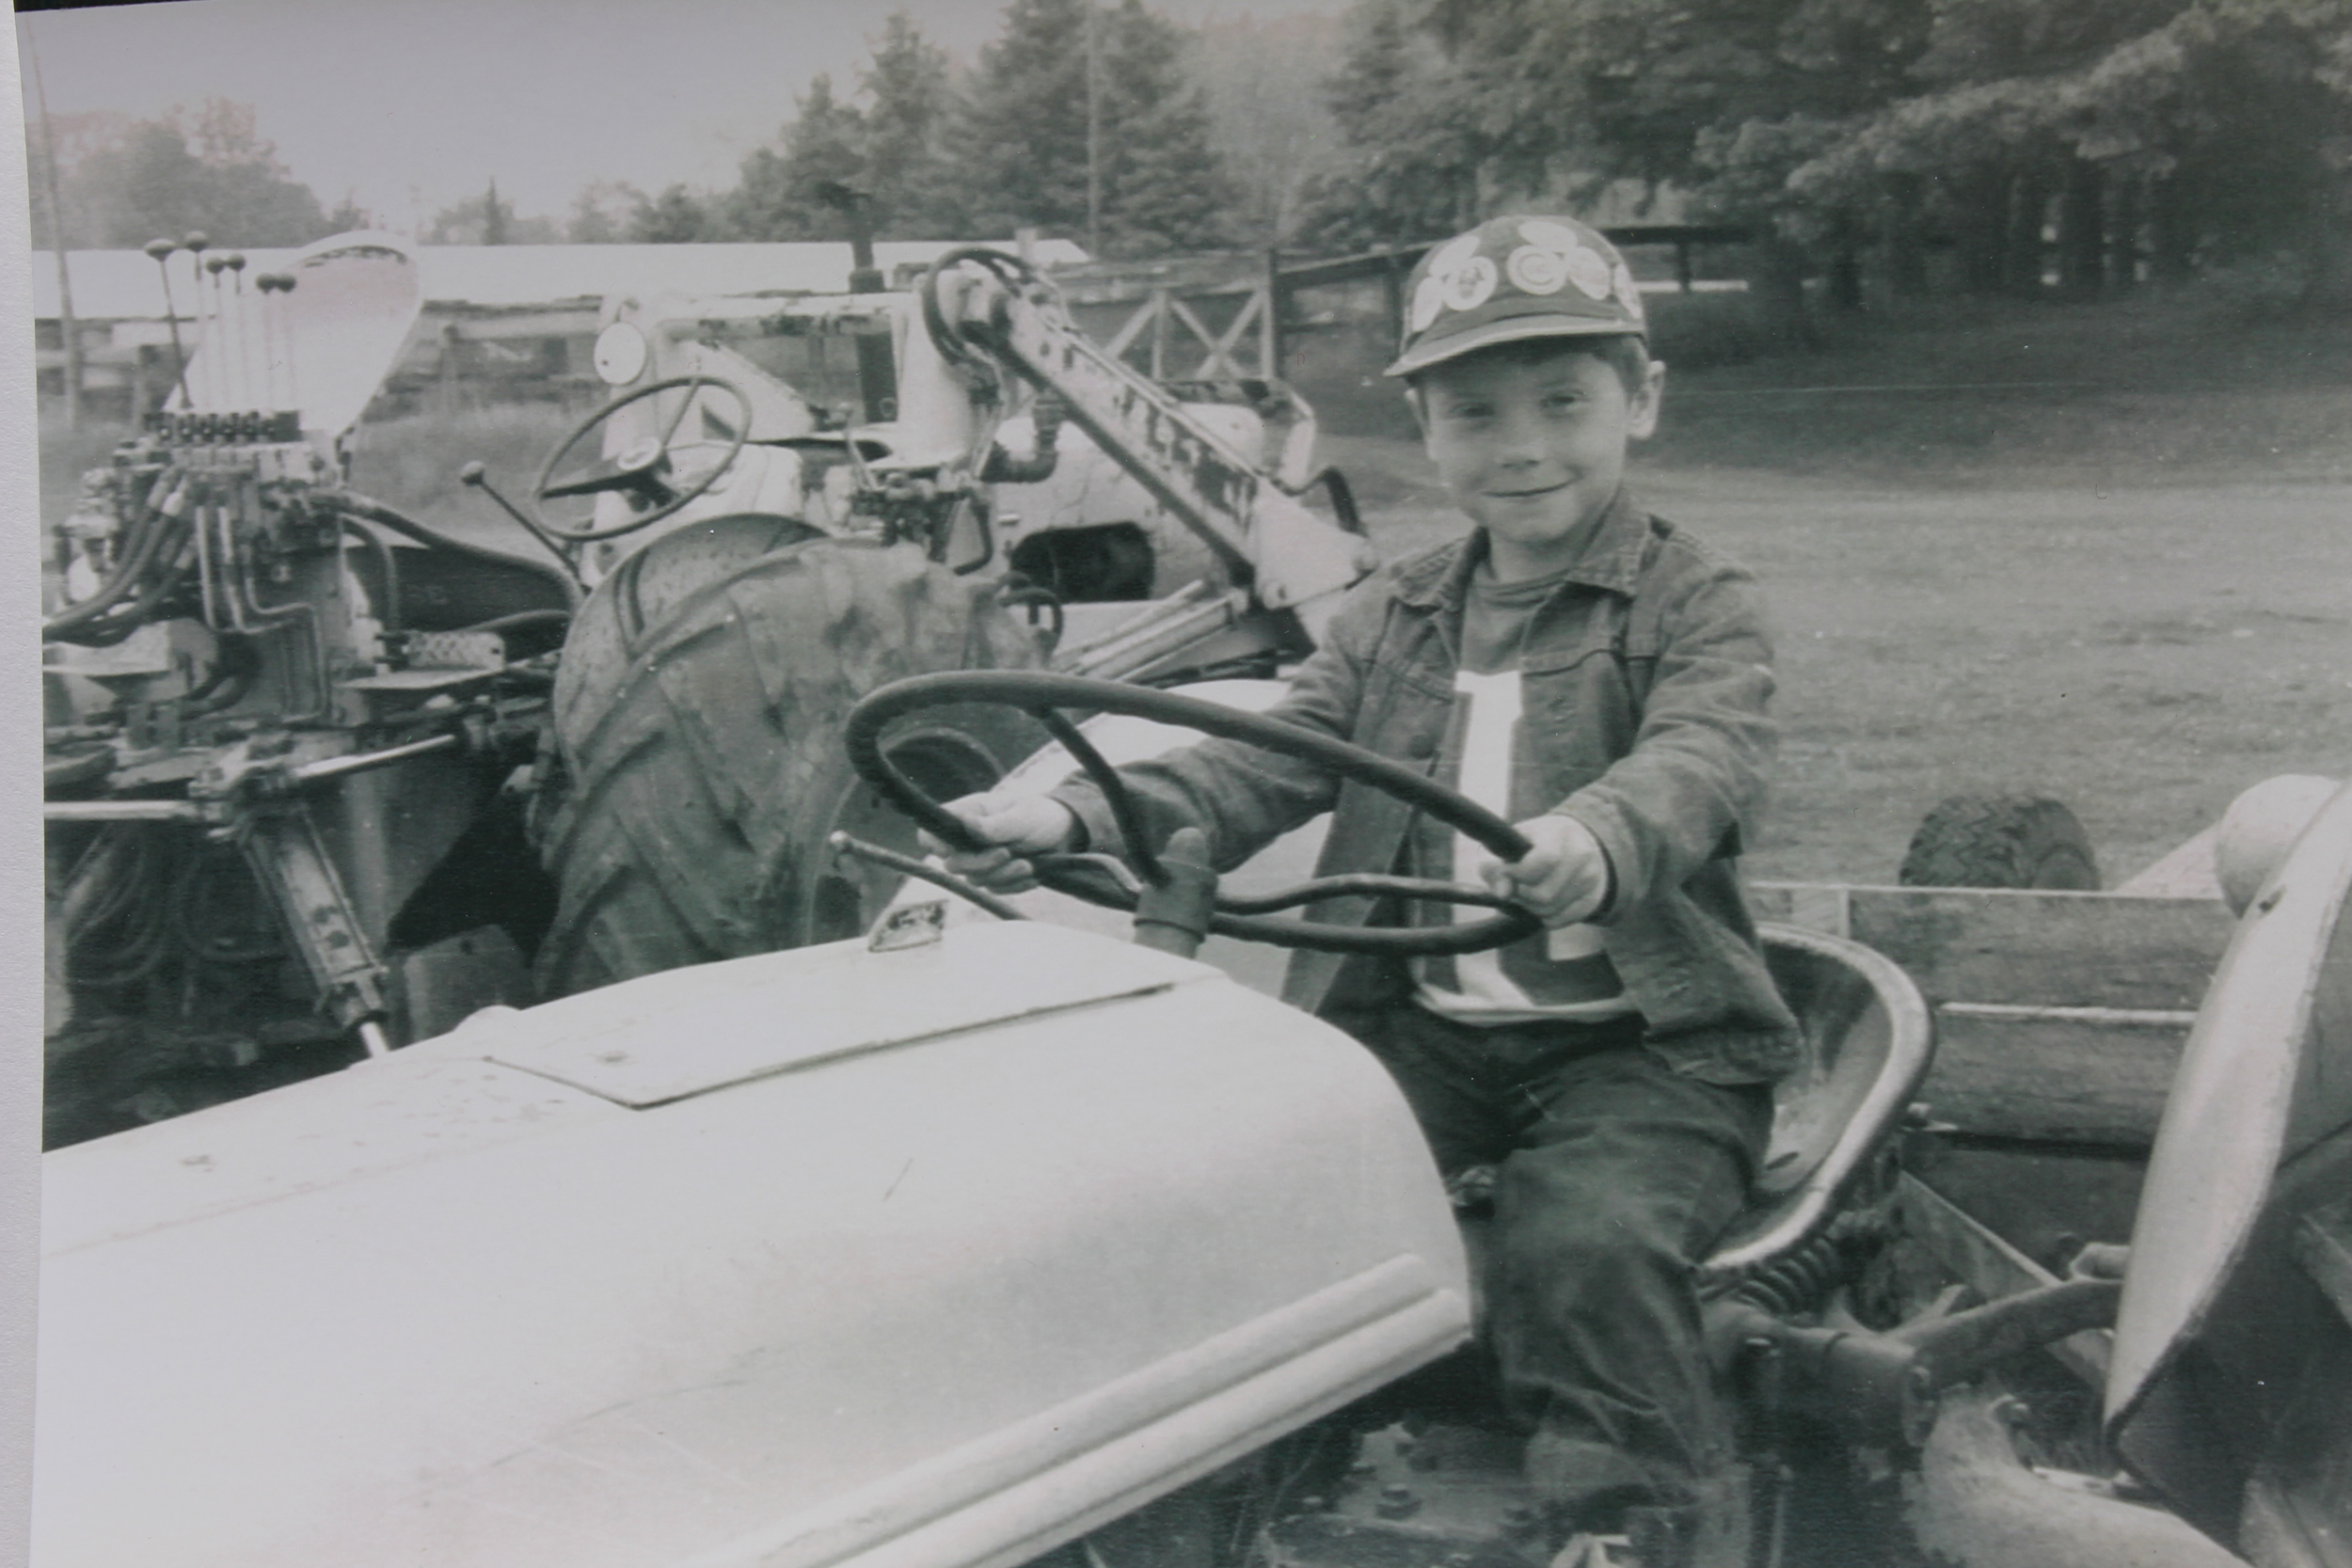  A tractor and me. Approximately 1976. Ogema, WI  ​ 